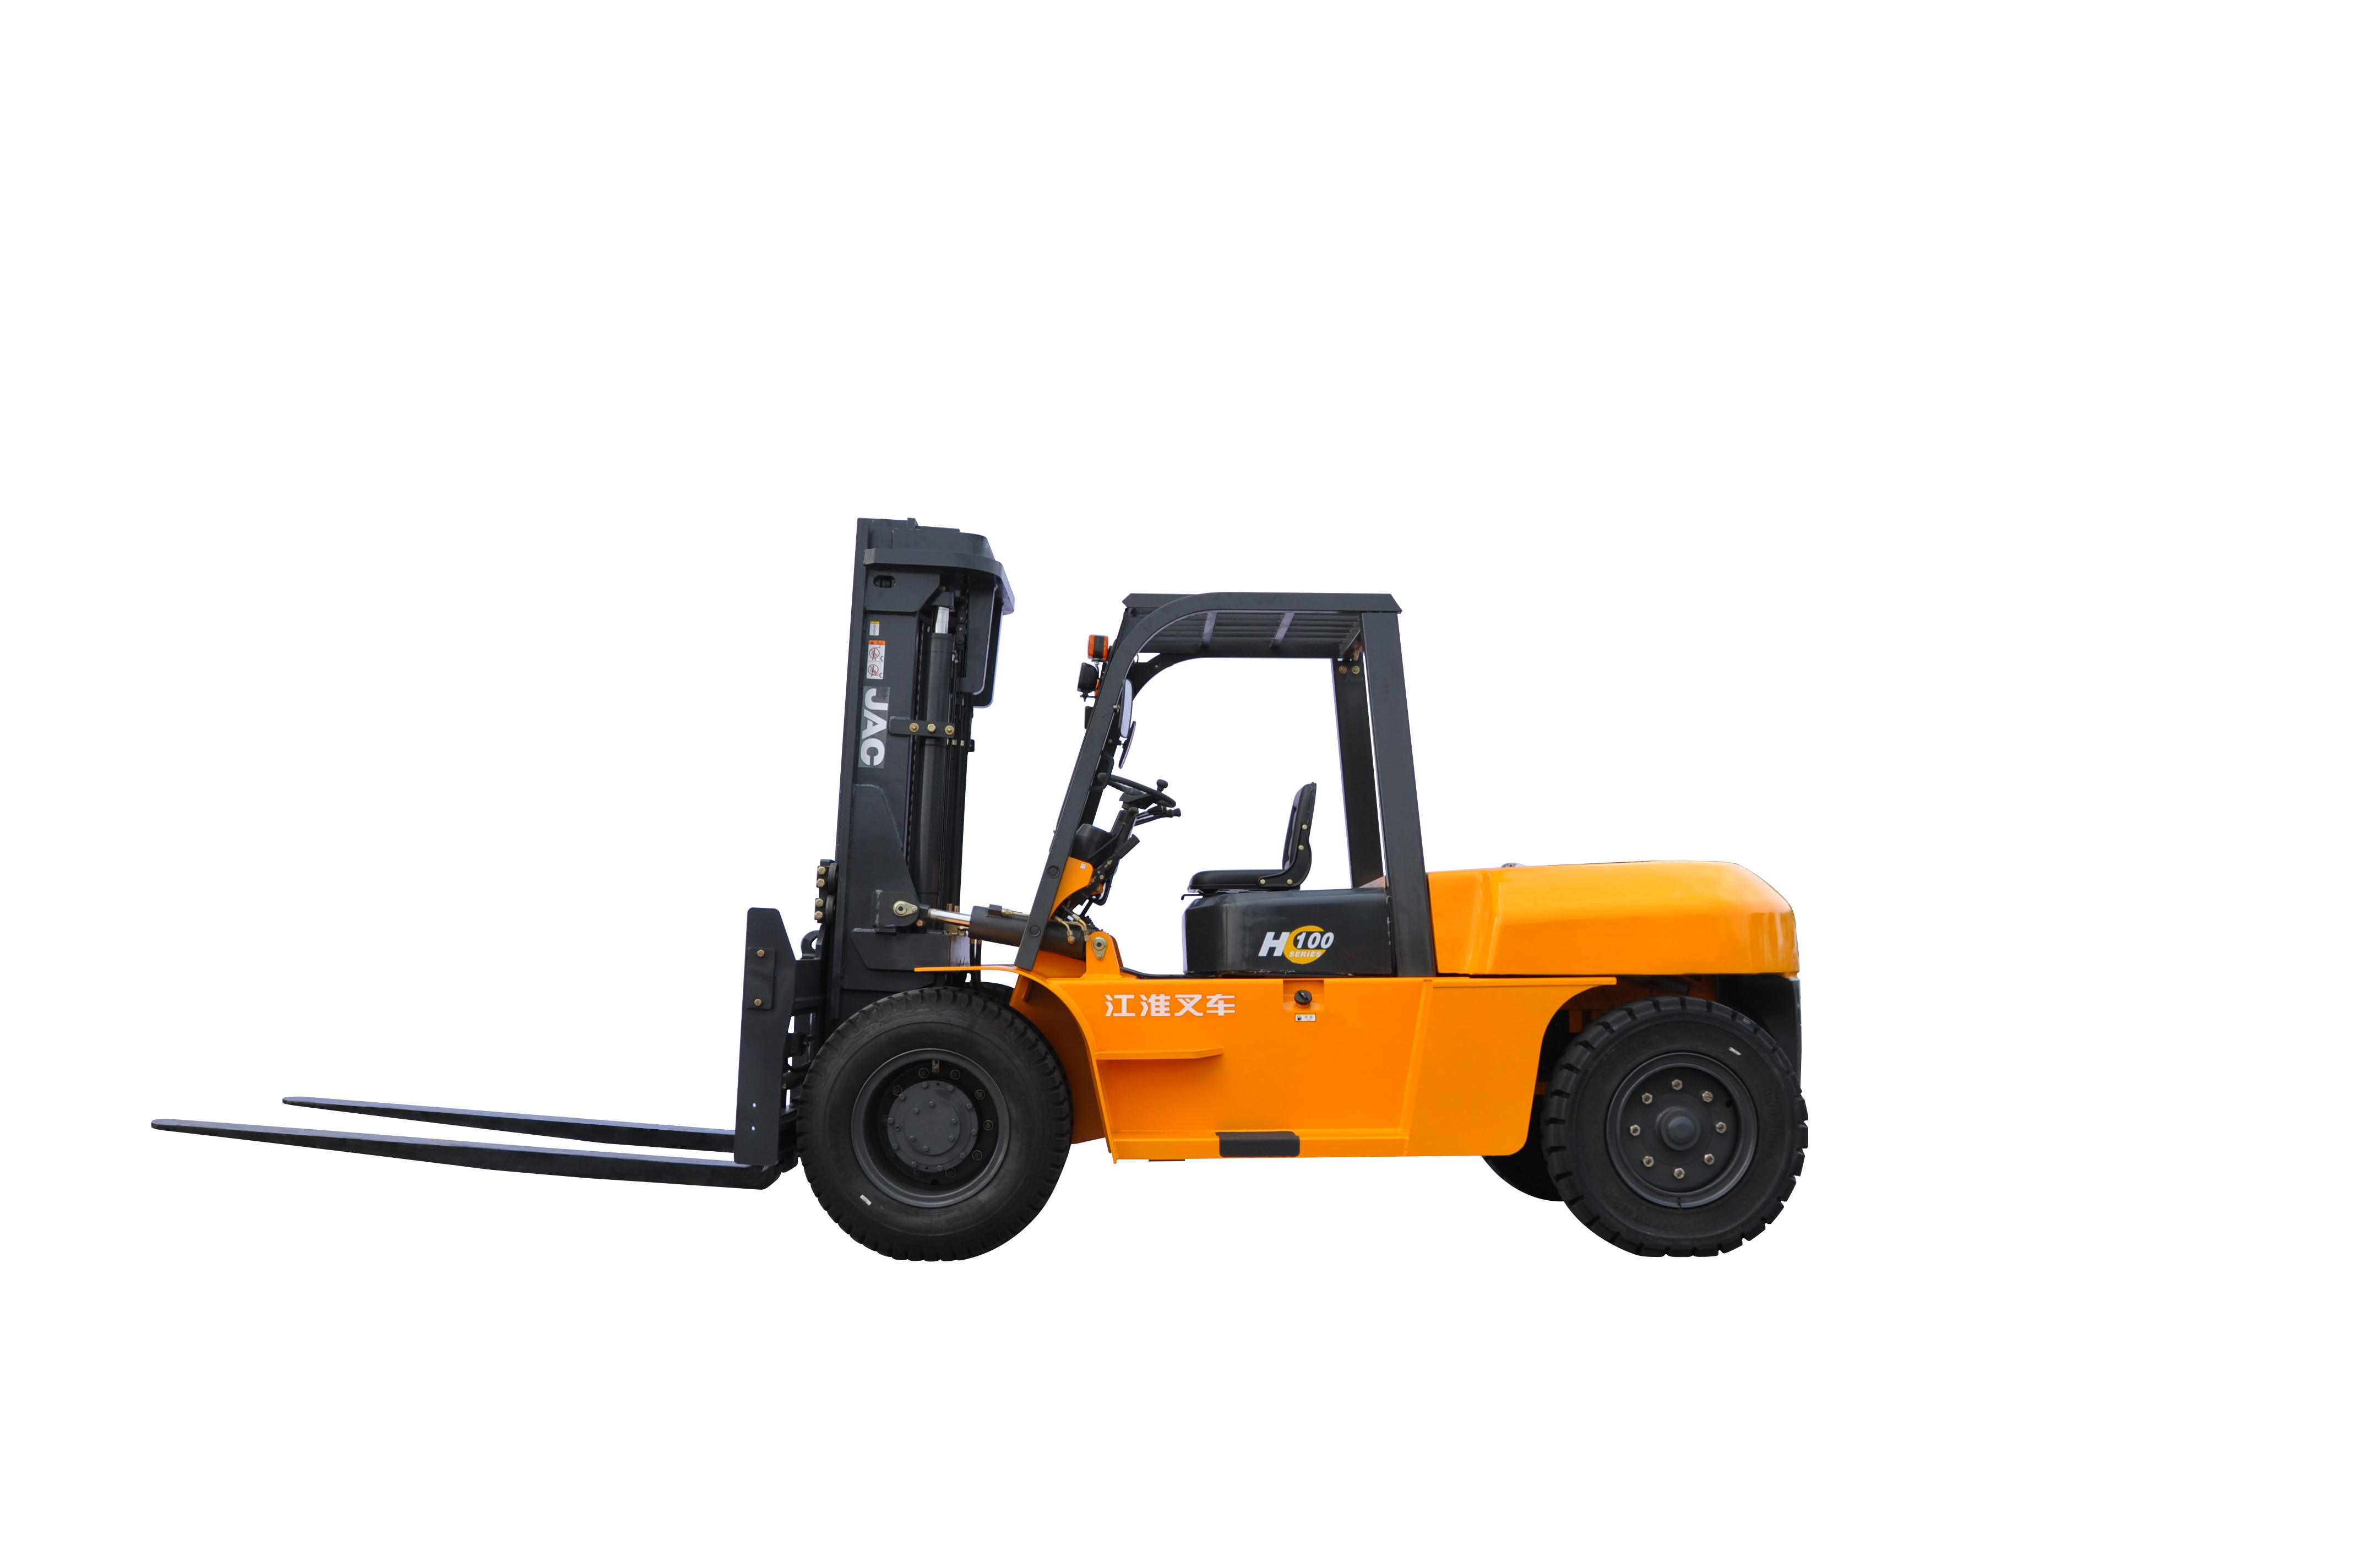  Small Turning Radius 10 Ton Forklift , Large Capacity Industrial Counterbalance Forklifts Heavy Equipment Forklift Manufactures